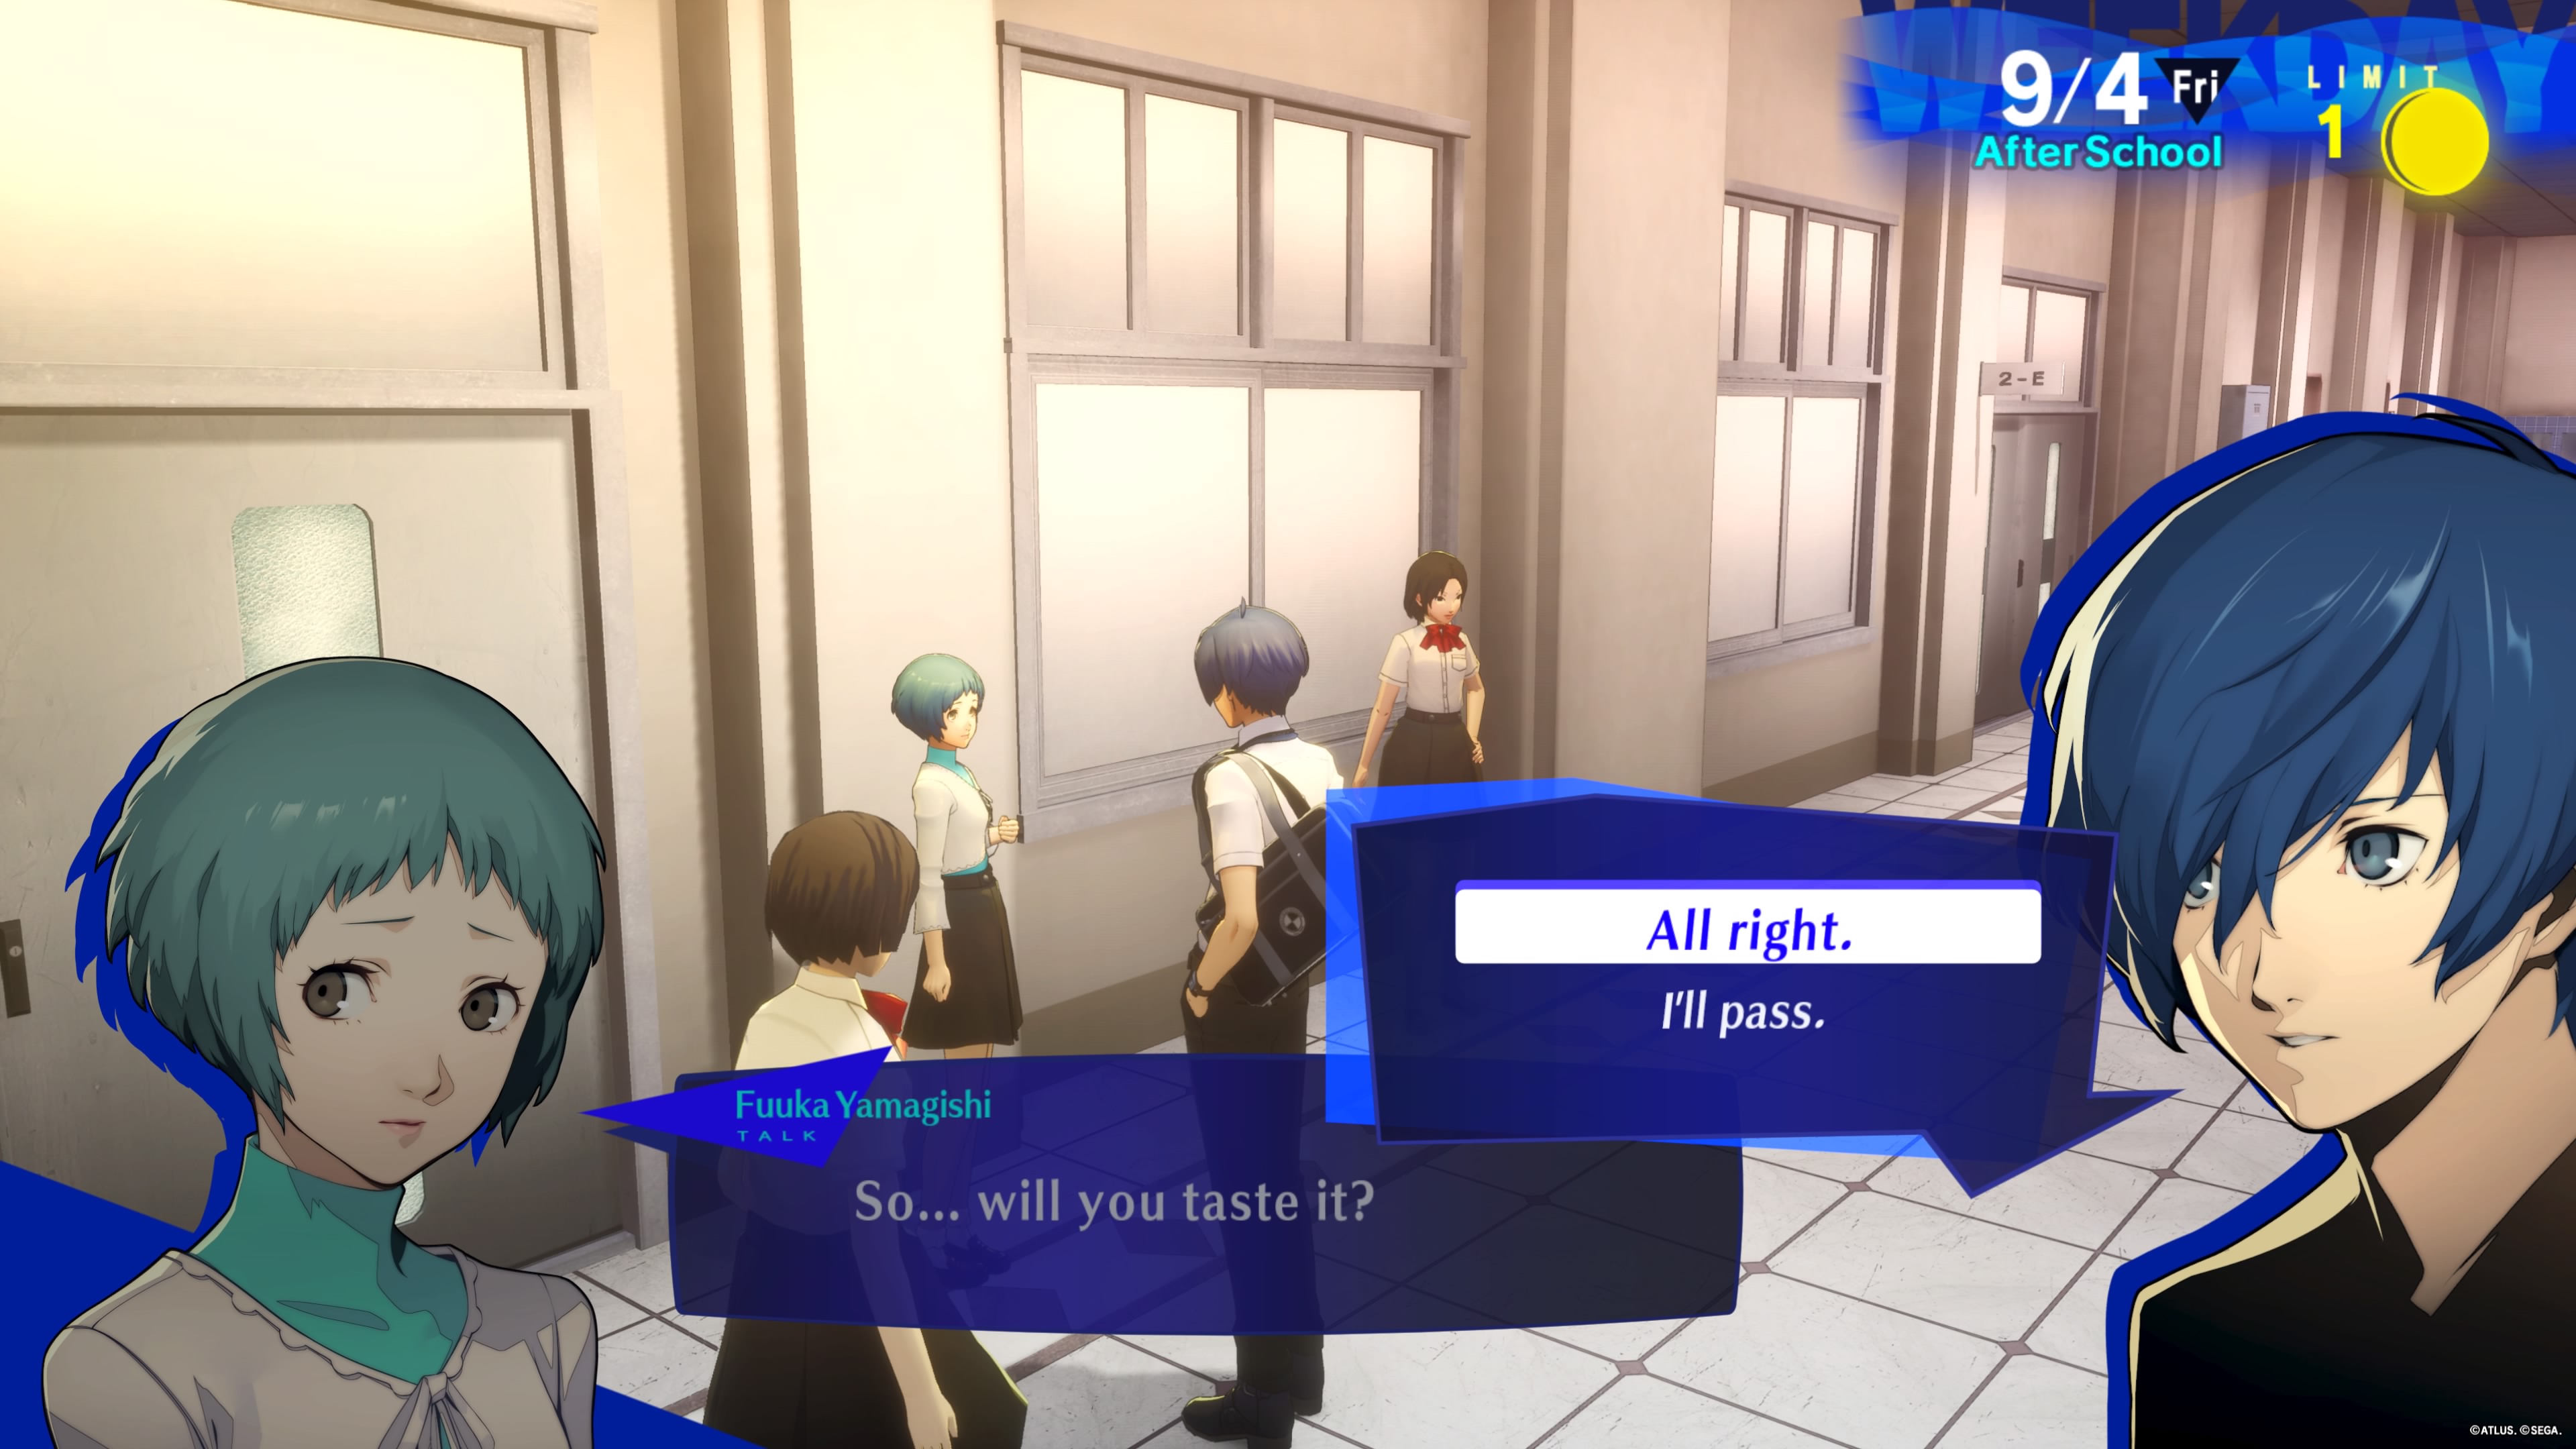 All Persona 3 Reload social link answers and unlock requirements